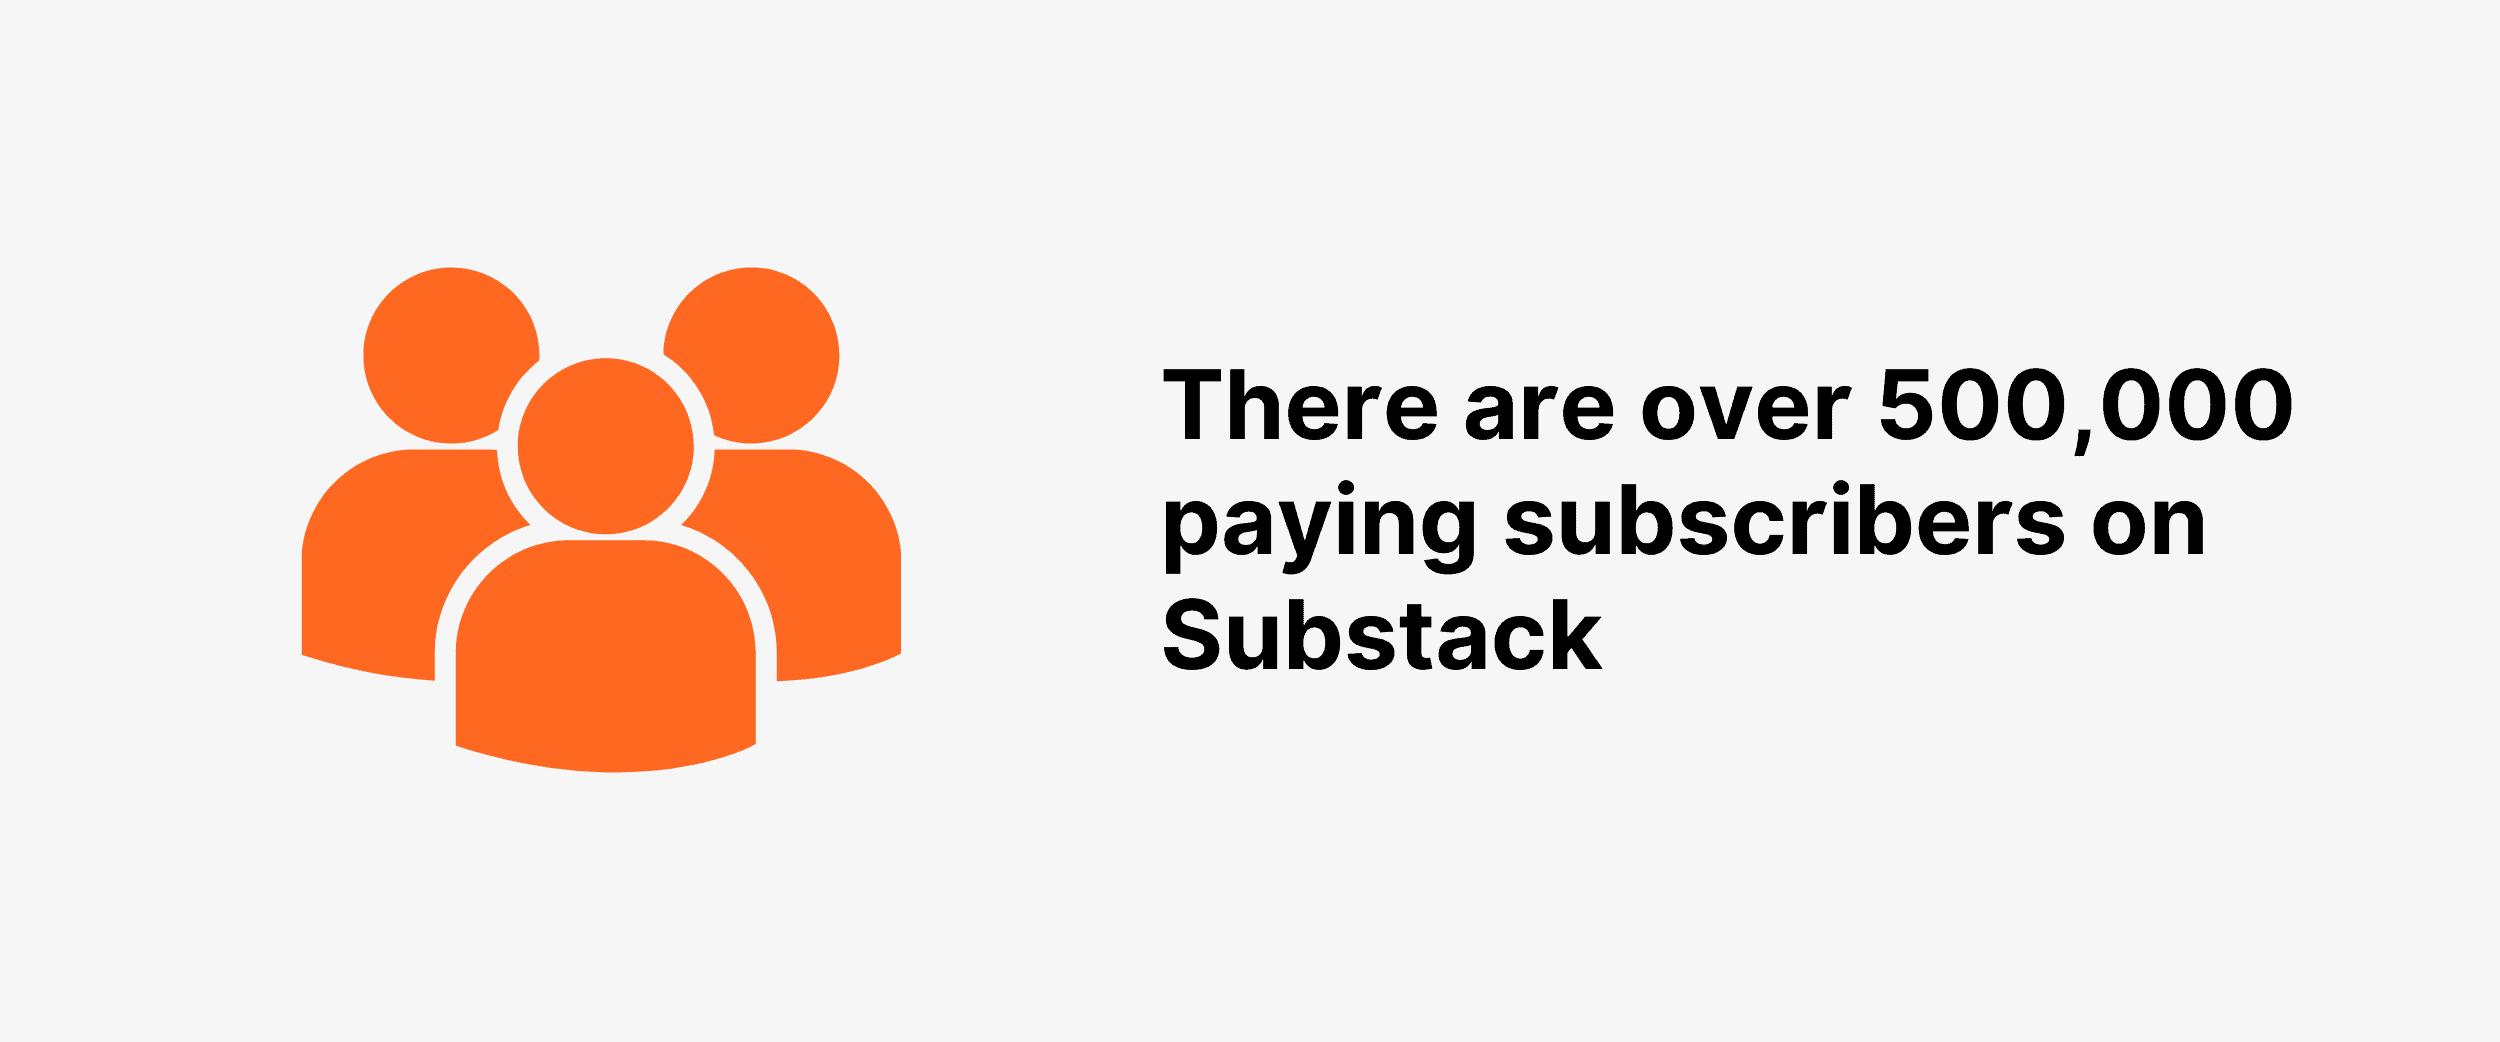 There are over 500,000 paying subscribers on Substack